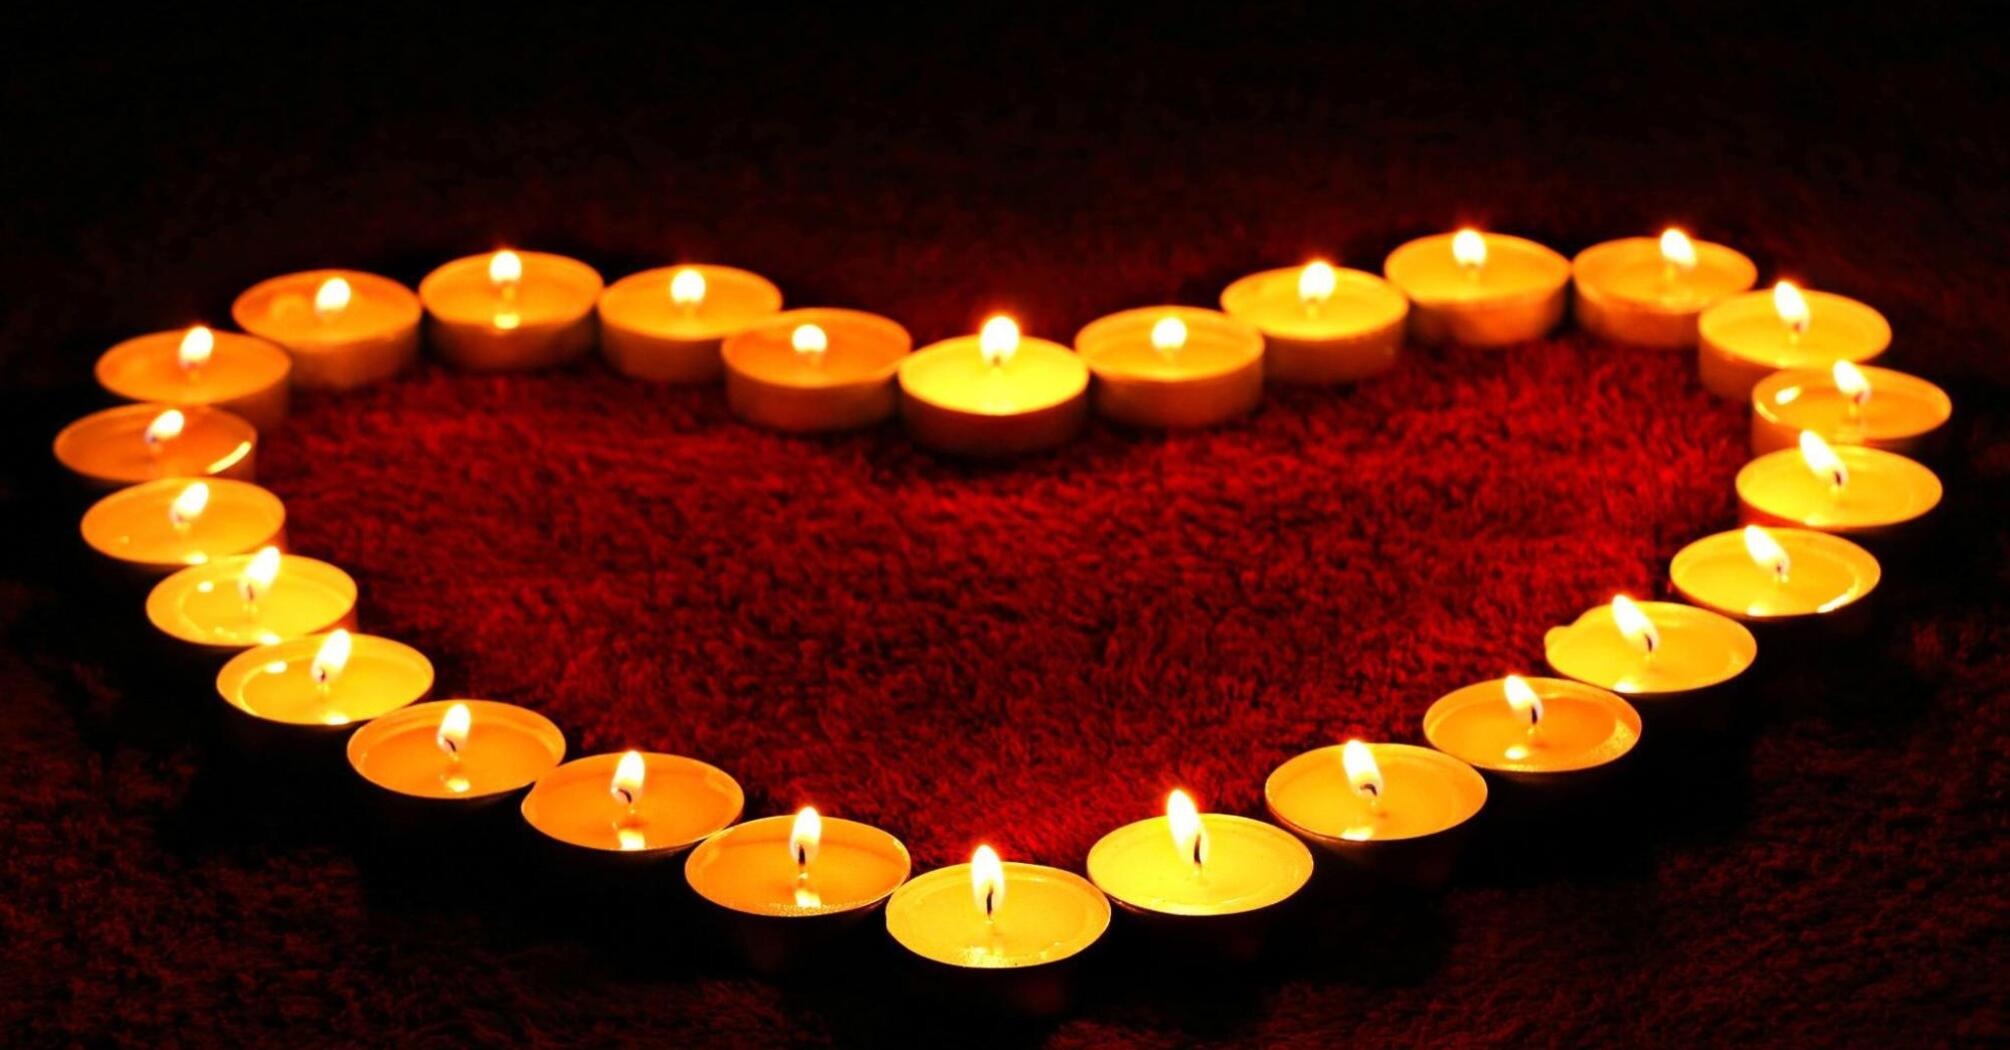 Heart made of burning candles